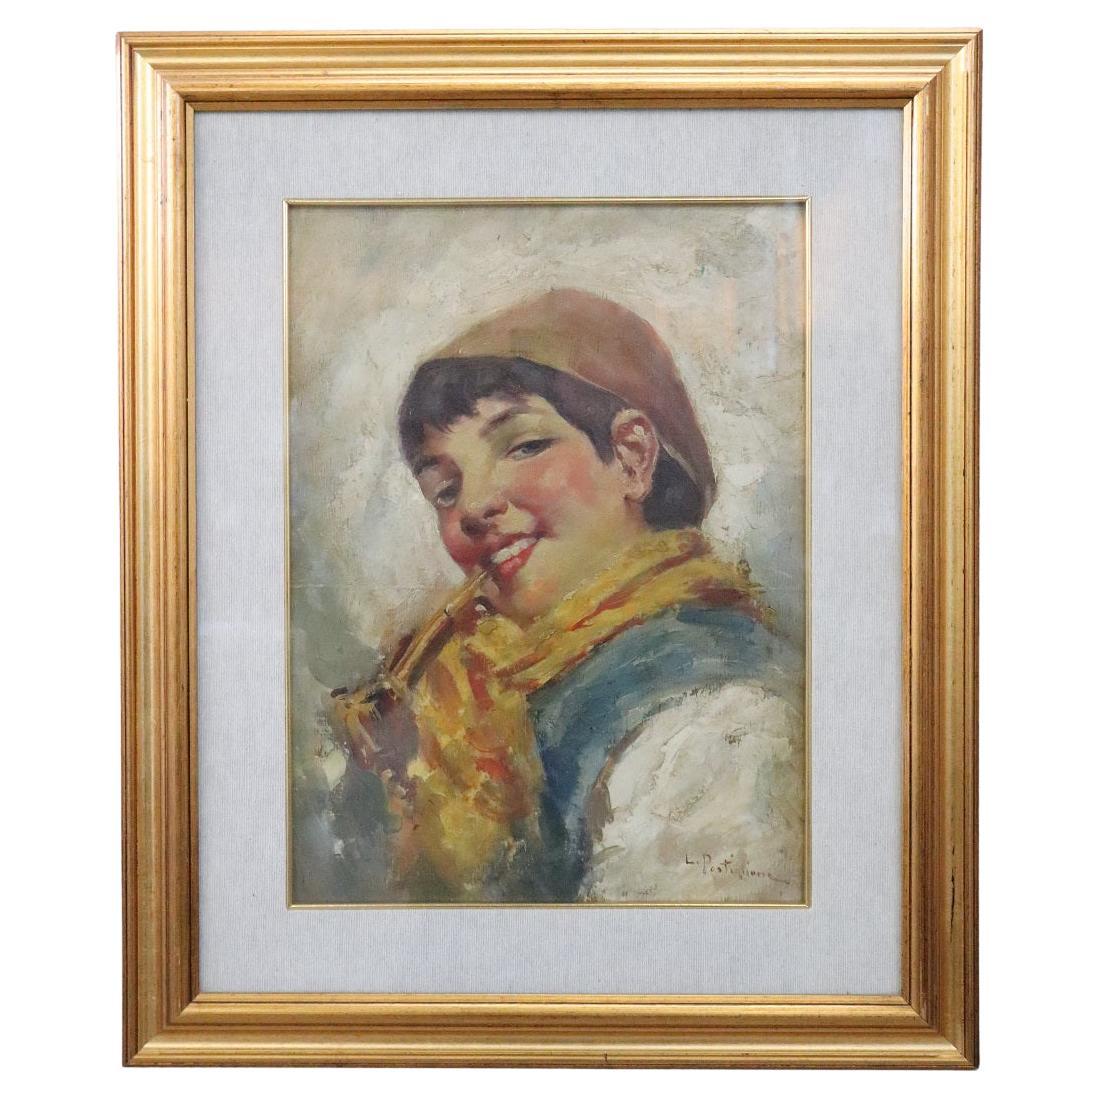 Early 20th Century Oil Painting on Board by Luca Postiglione, Italian Artist